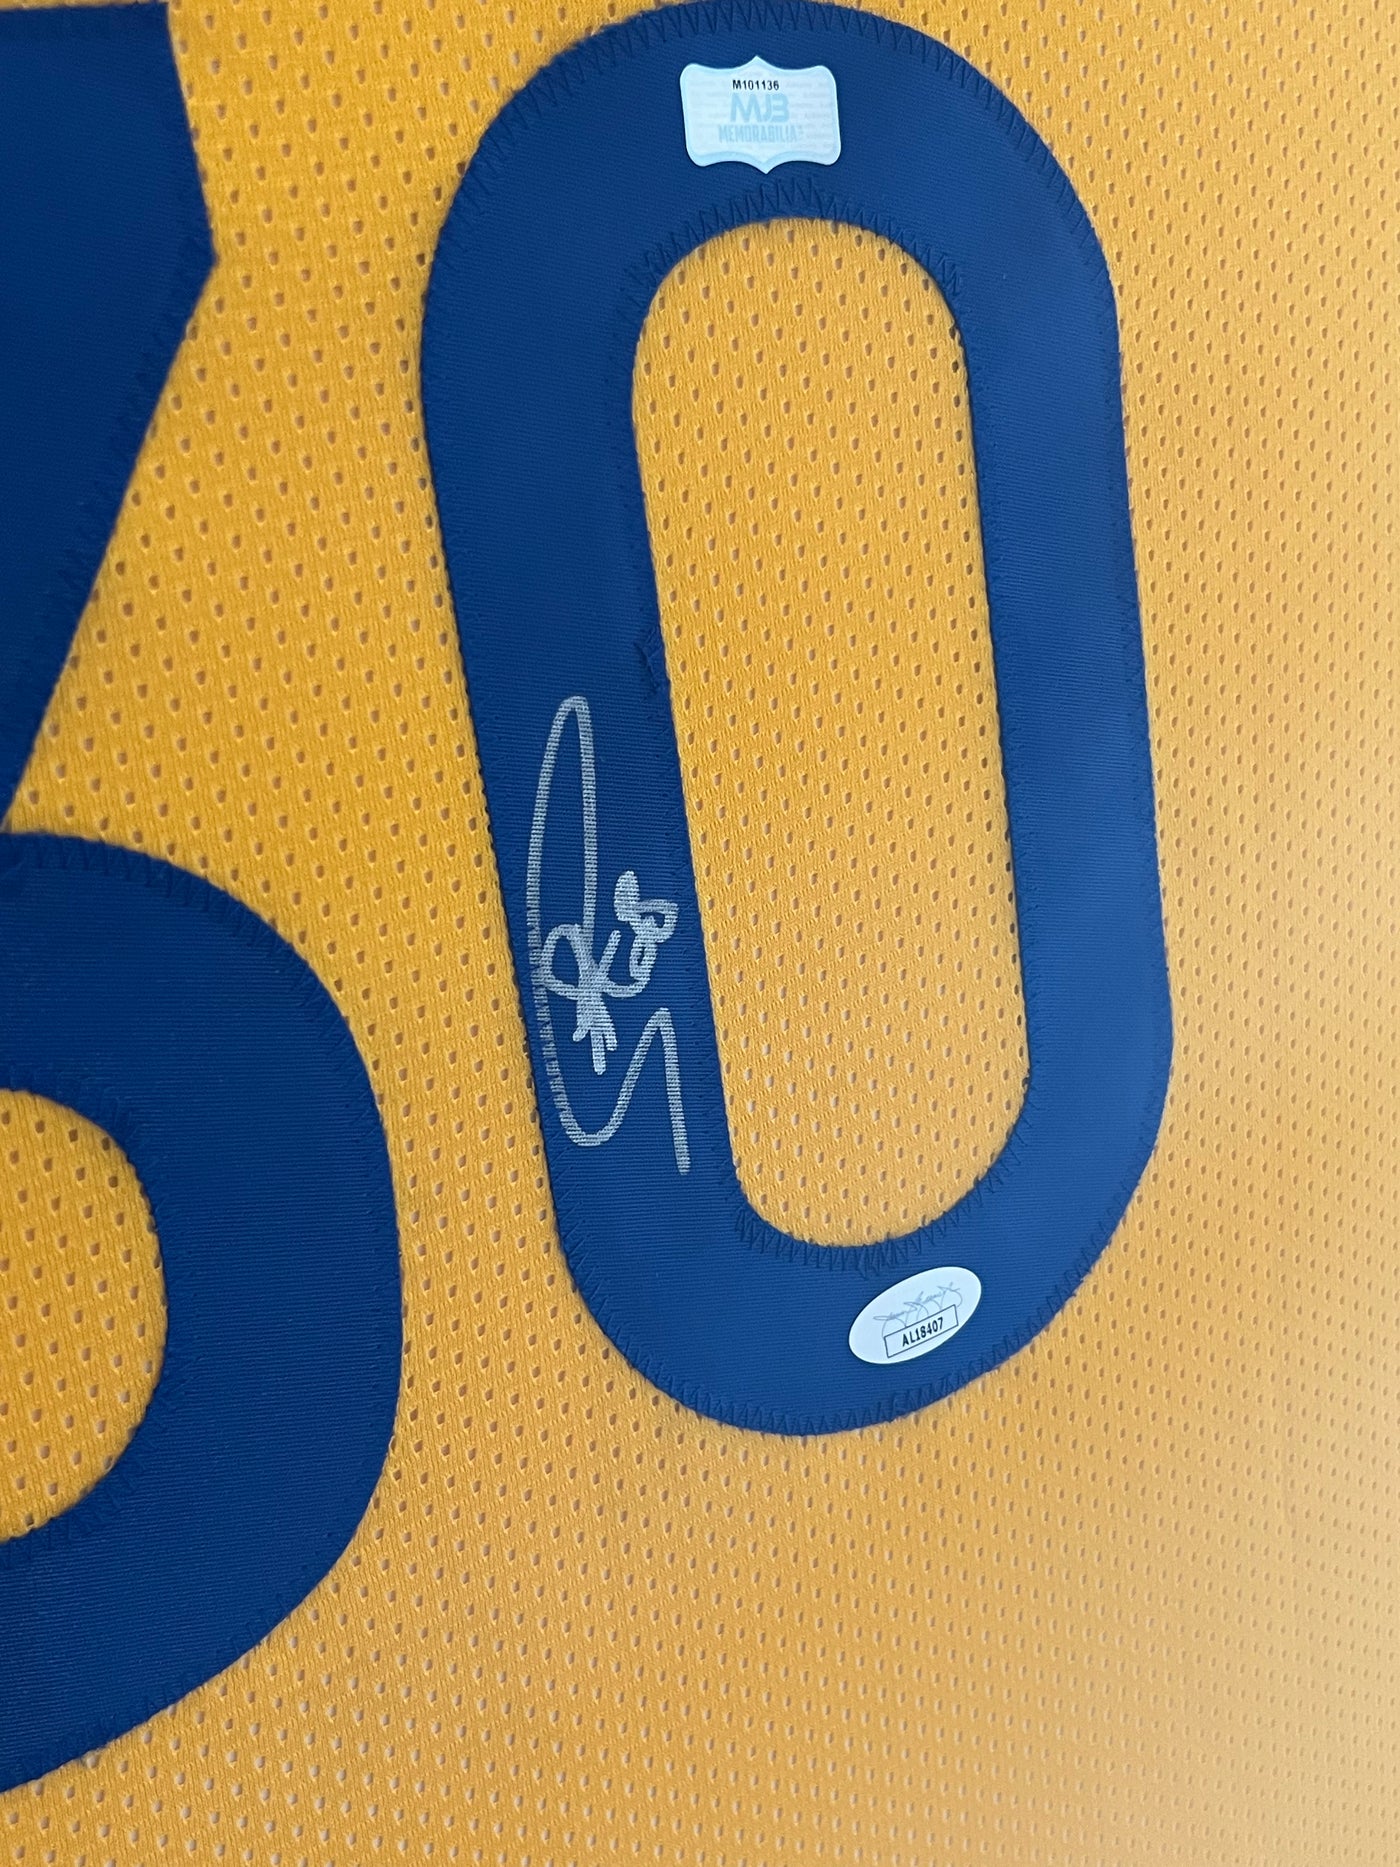 Stephen Curry Personally hand signed Golden State Warriors Jersey with JSA Authentication